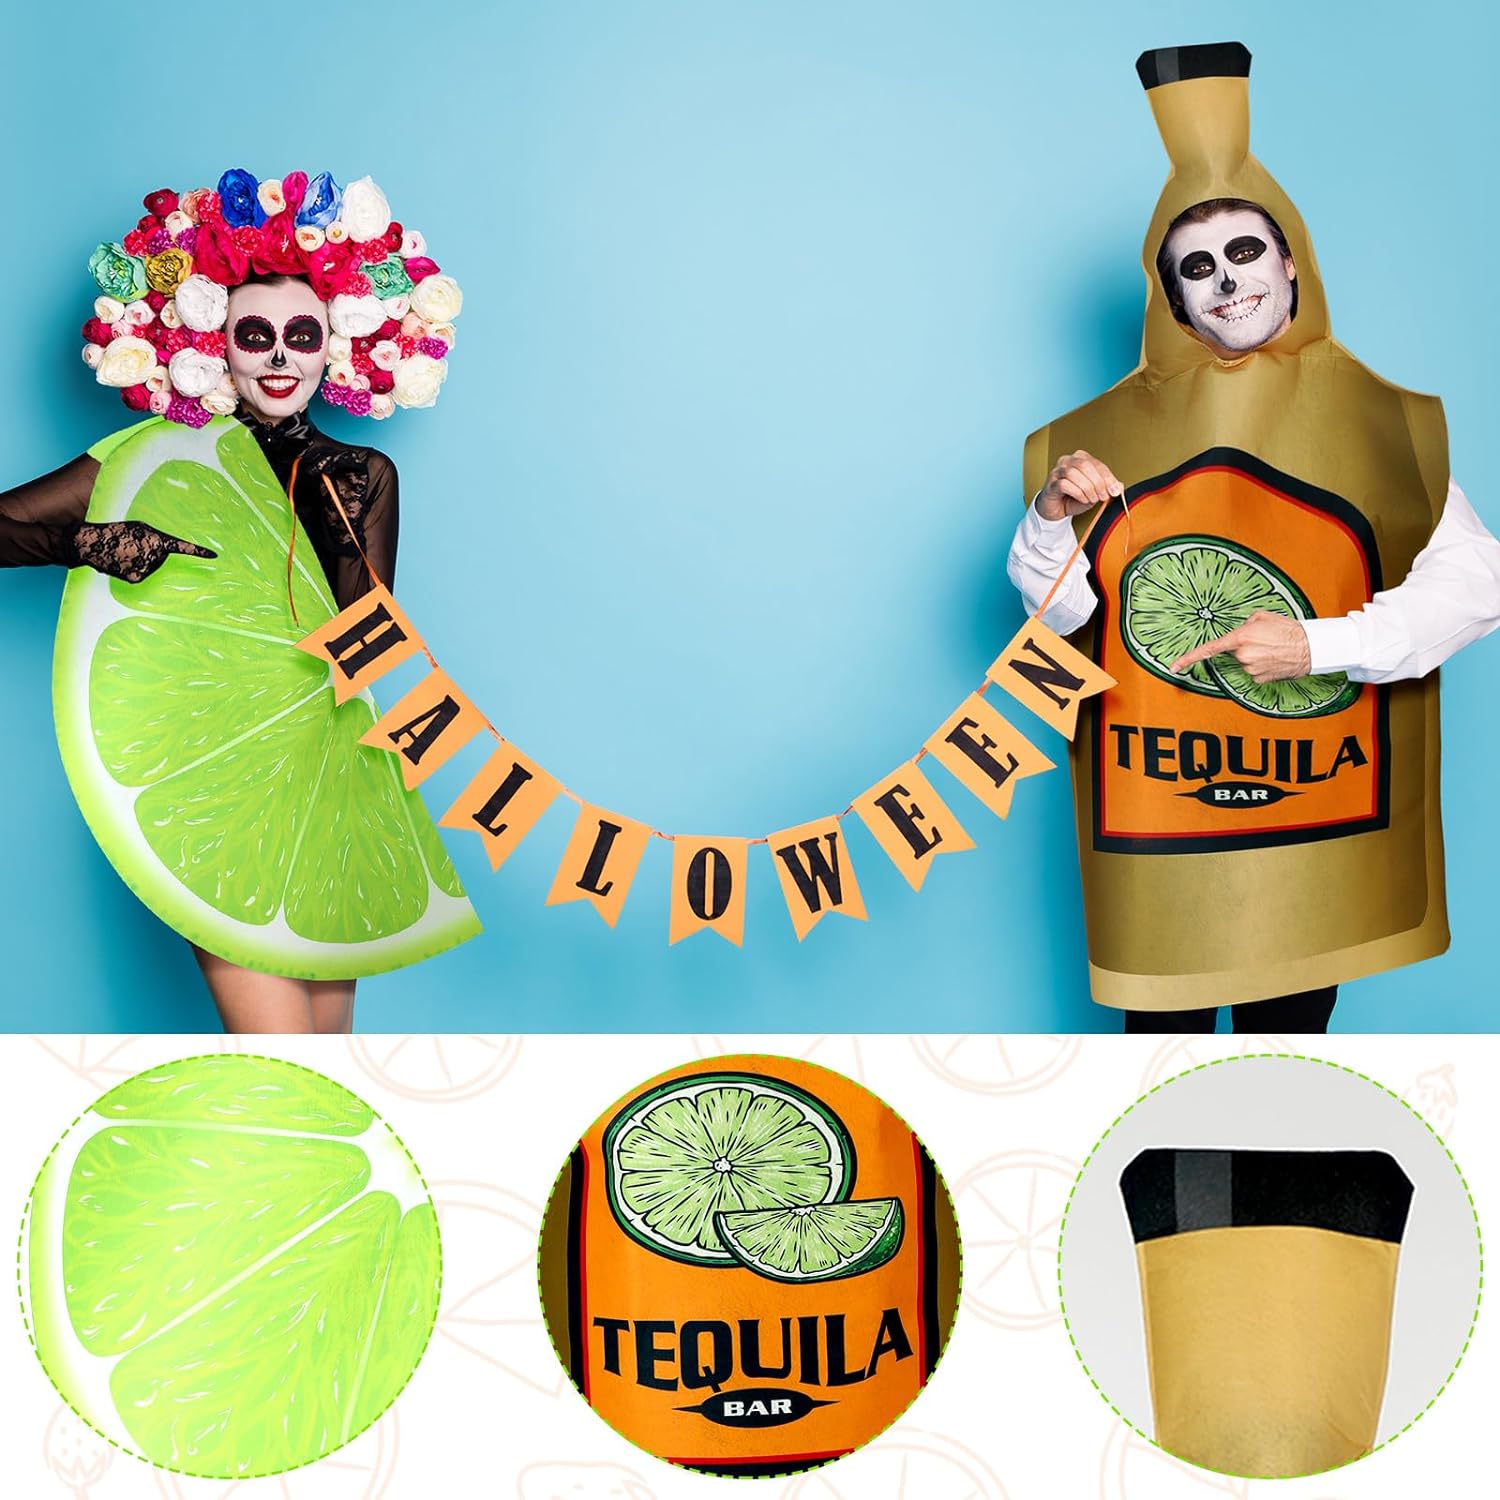 HooLing 2 Pcs Couples Halloween Costumes for Adults Tequila Bottle and Lime Slice Couples Costume Drink Suit Outfits